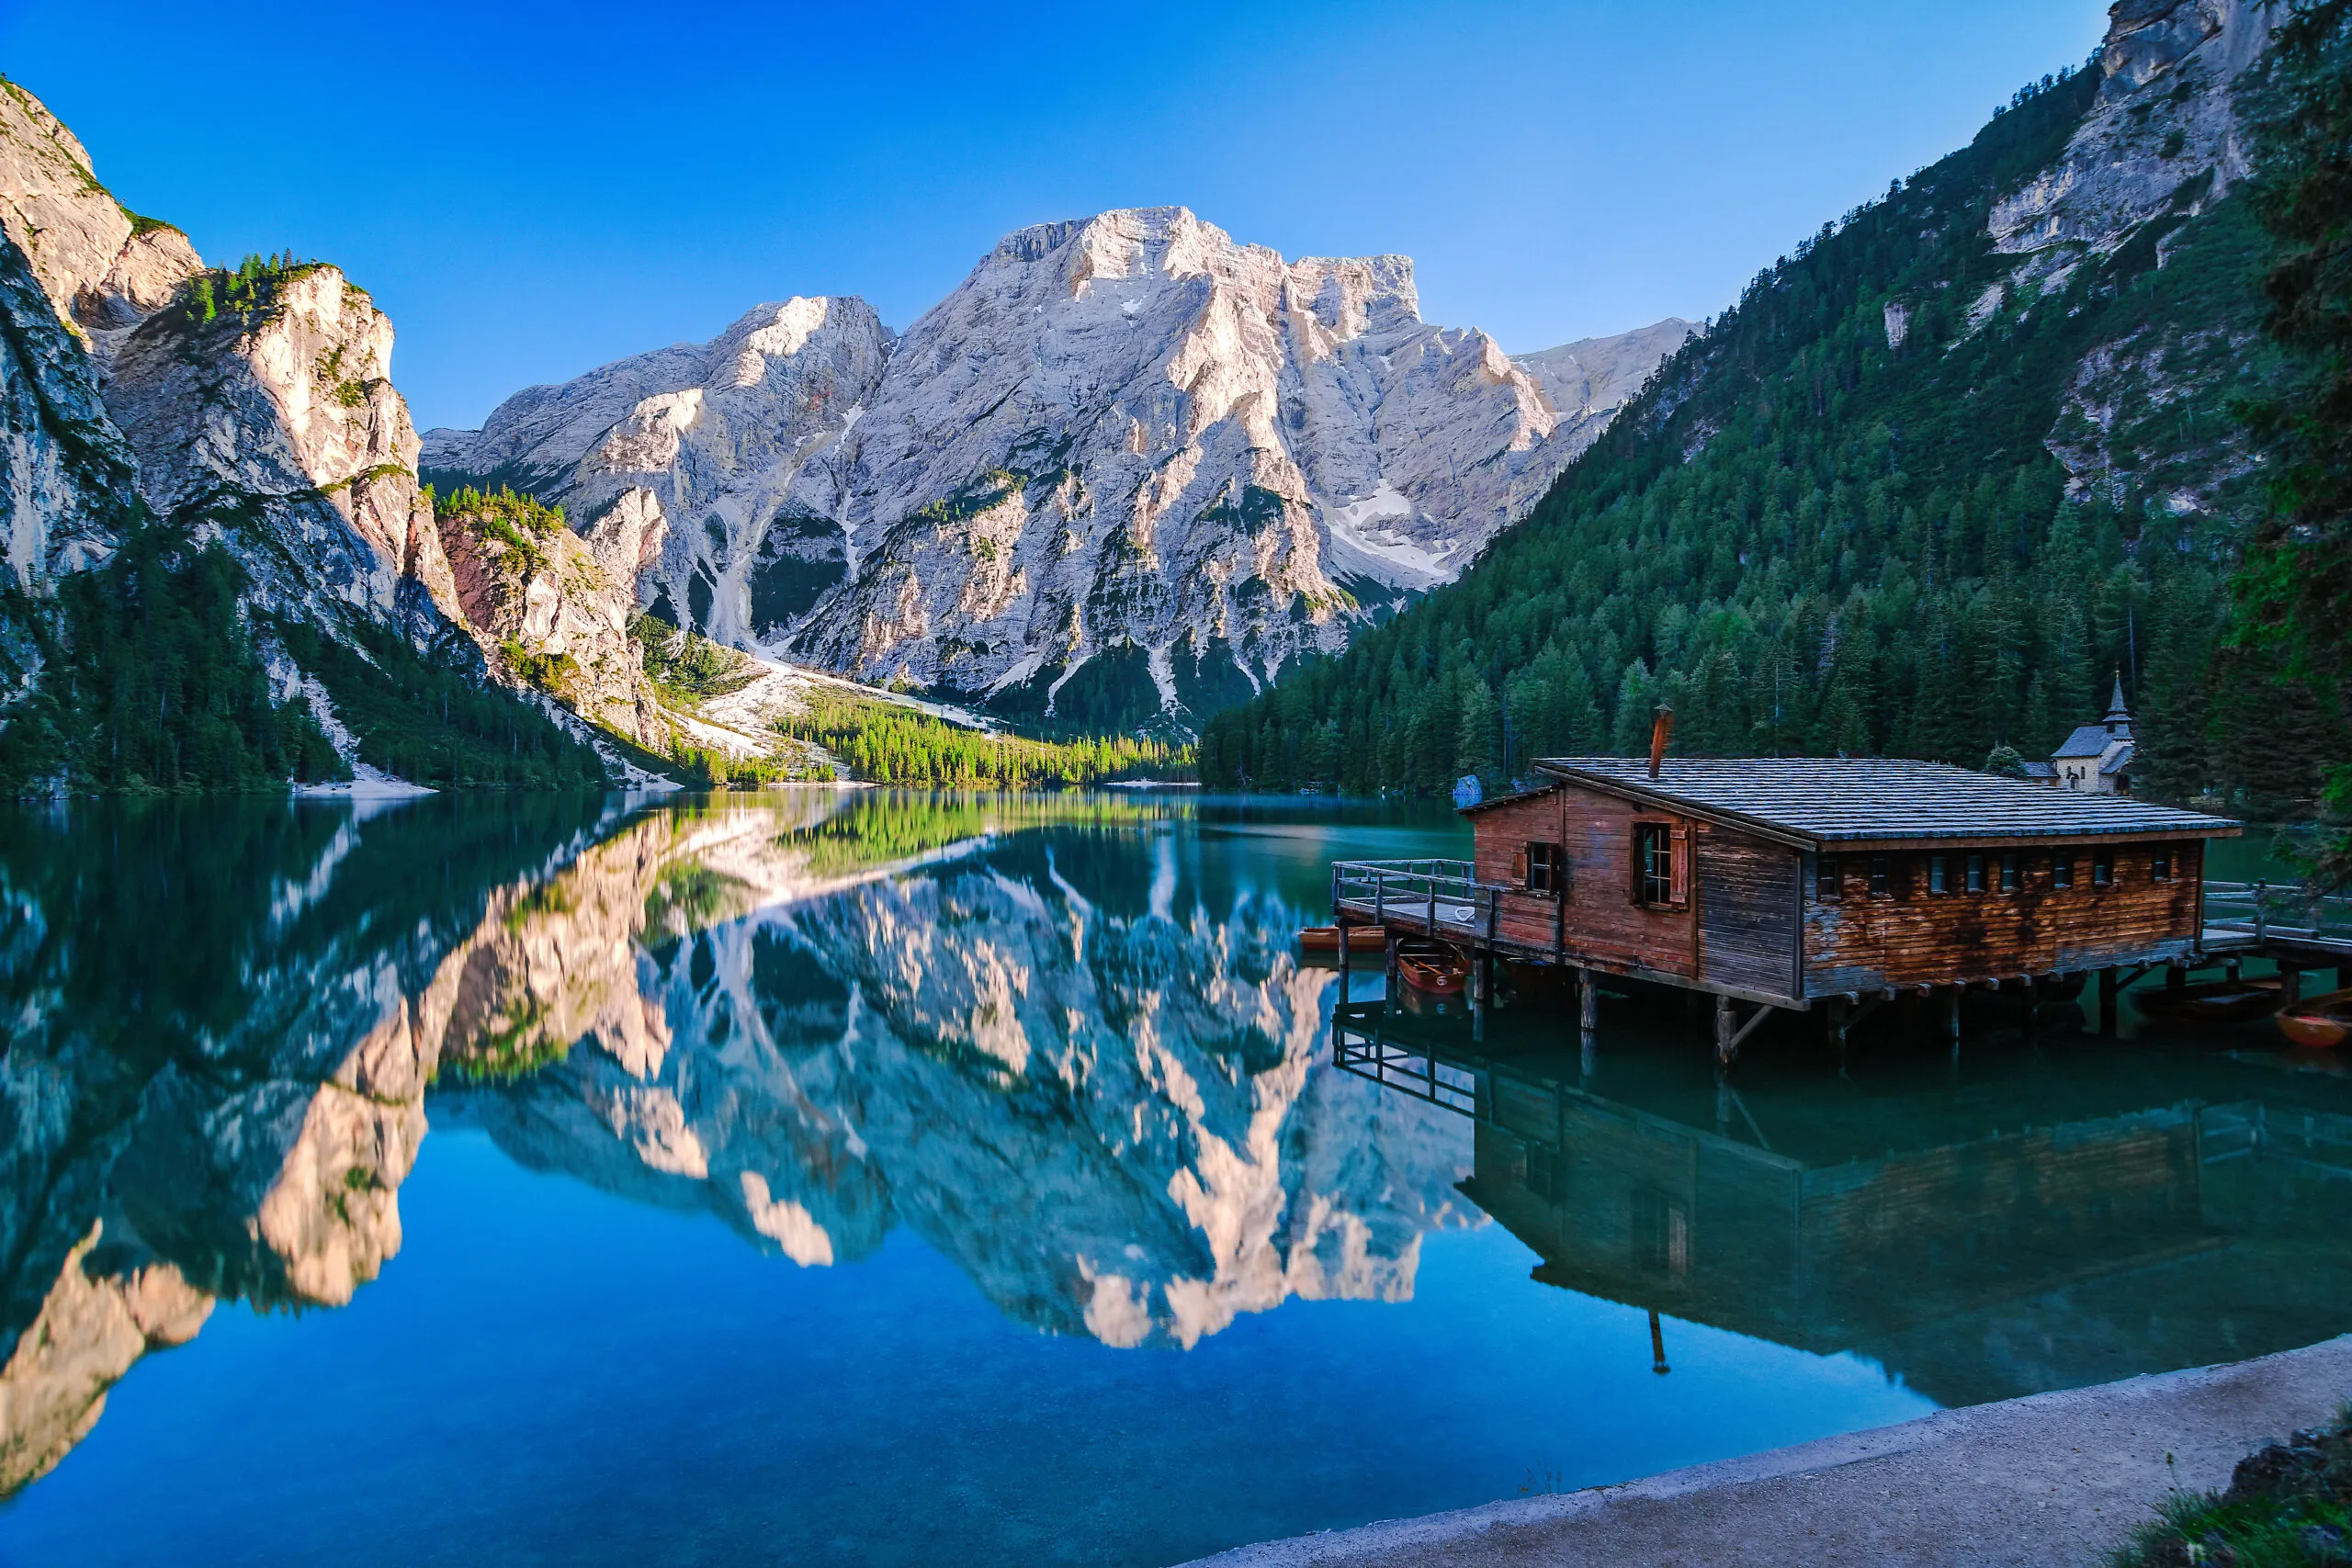 Lago di braies on a perfect summer day